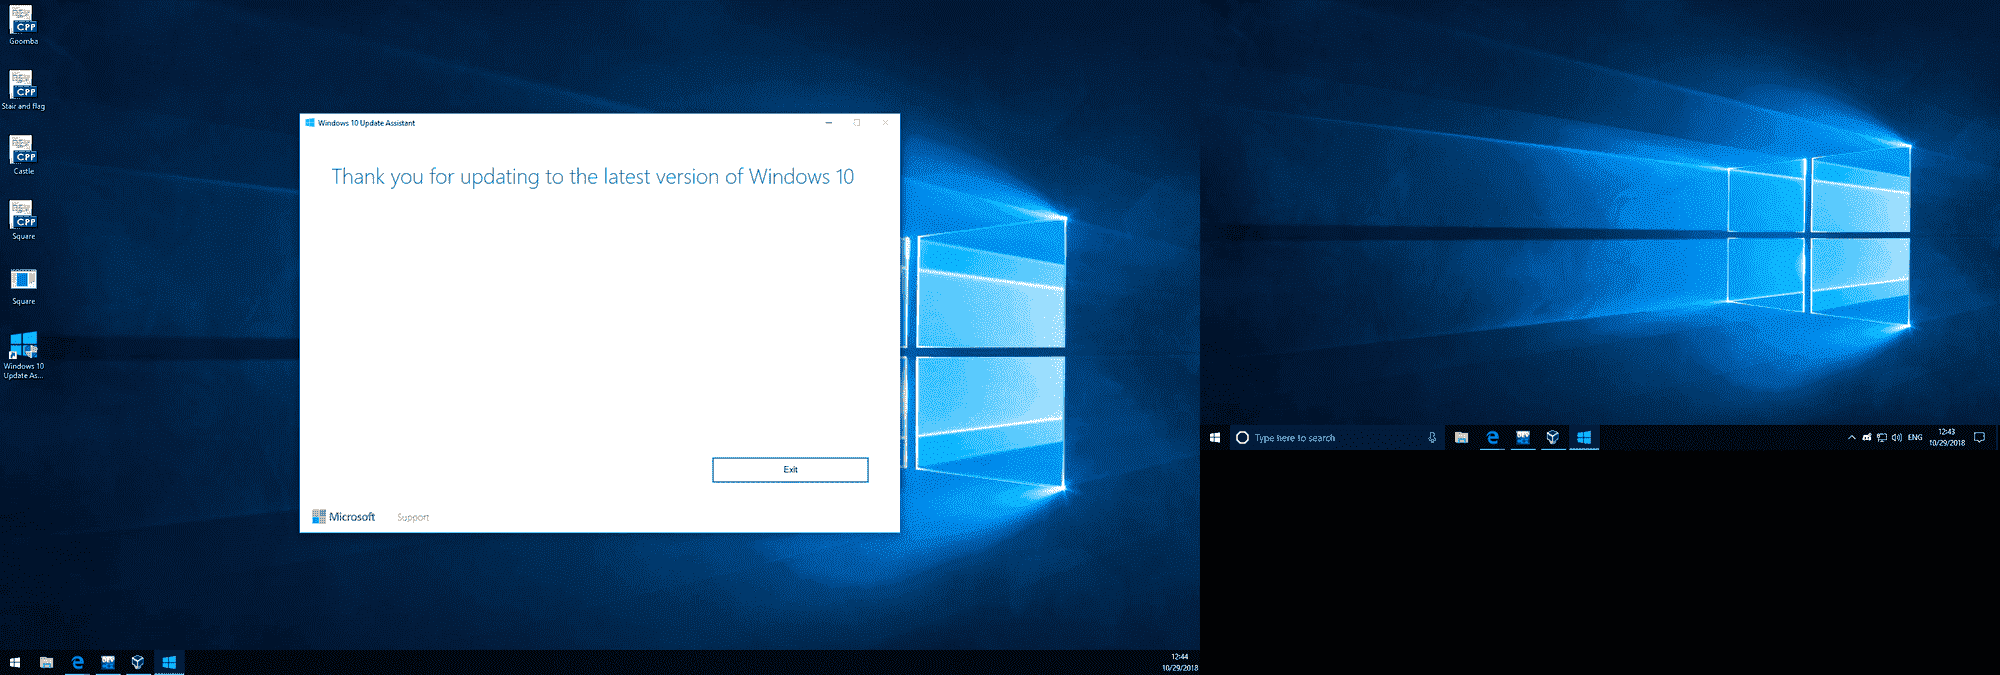 Windows 10 1809 didn't install 36e04b3e-0b1a-42ee-94b0-368550a96874?upload=true.png